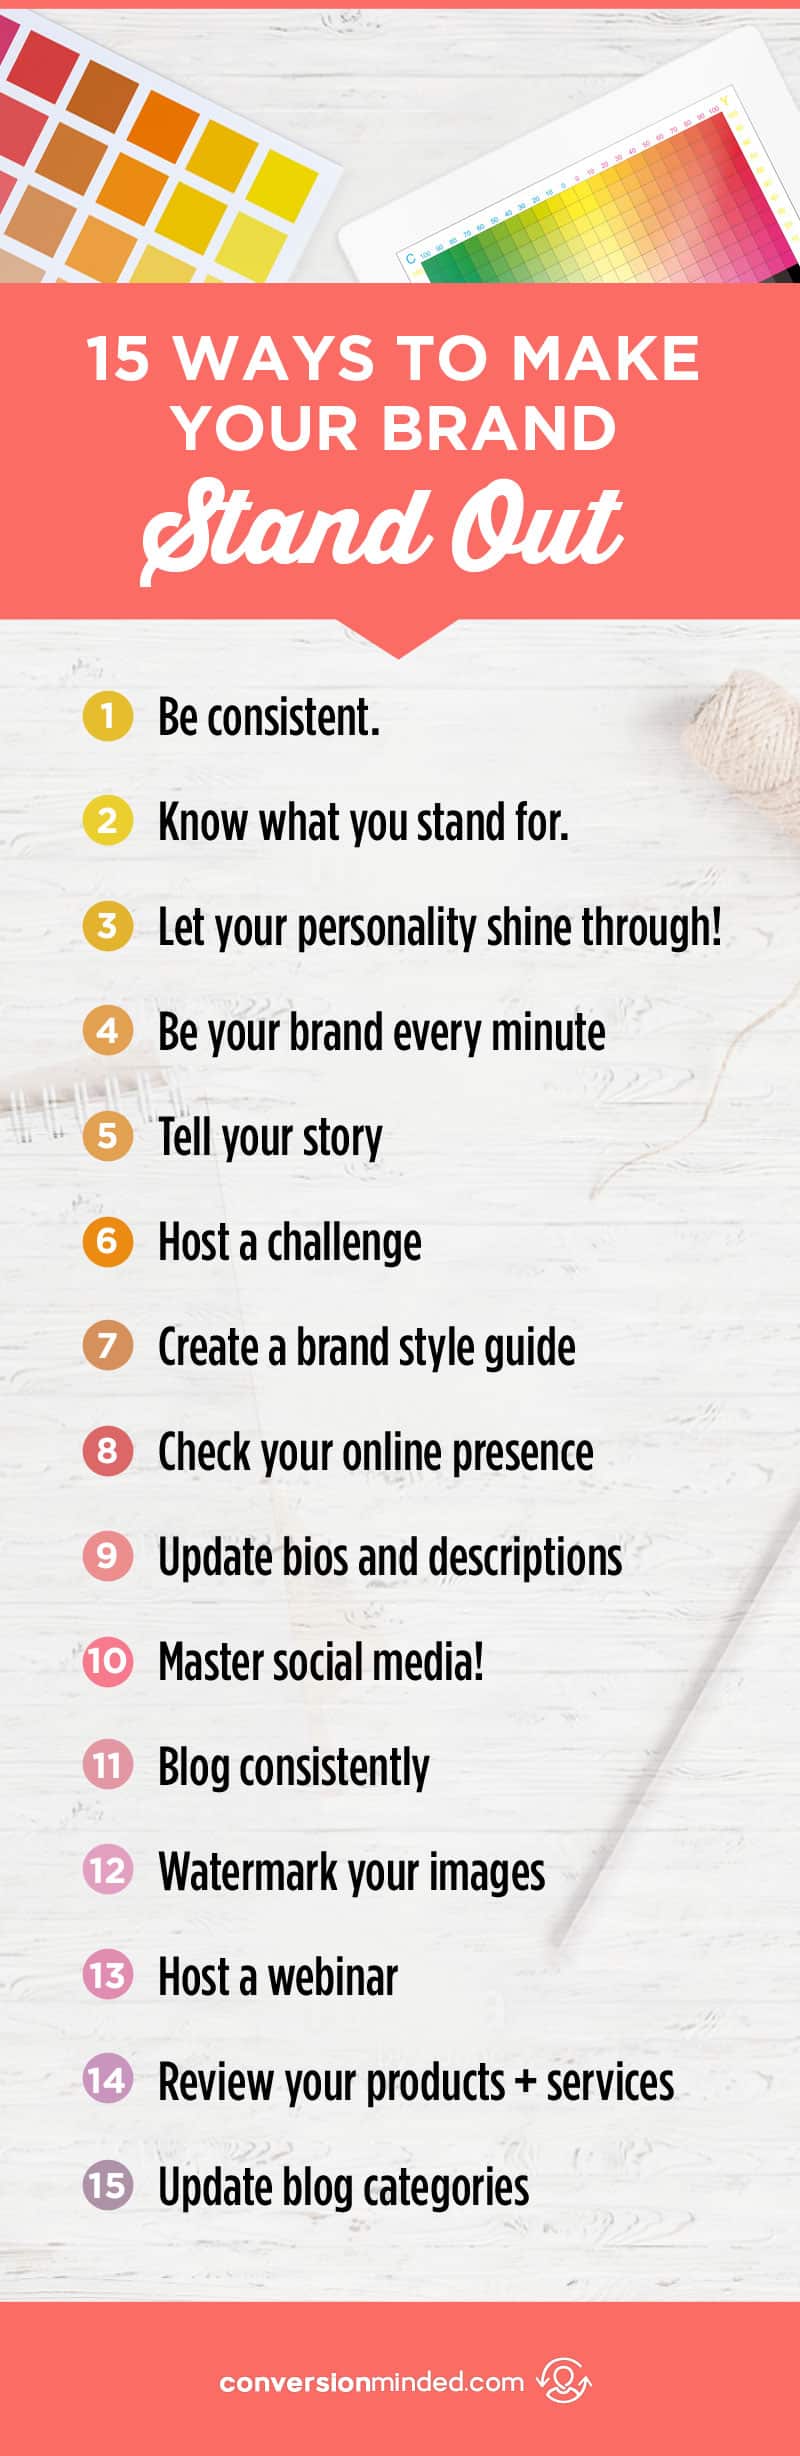 15 Ways to Make Your Brand Stand Out | Struggling to attract your dream customers? Ready to stand out and get noticed online? This post was created just for you. It include 15 things bloggers and entrepreneurs can do to stand out above the rest and effortlessly attract your ideal customers. Click through to see all the tips!